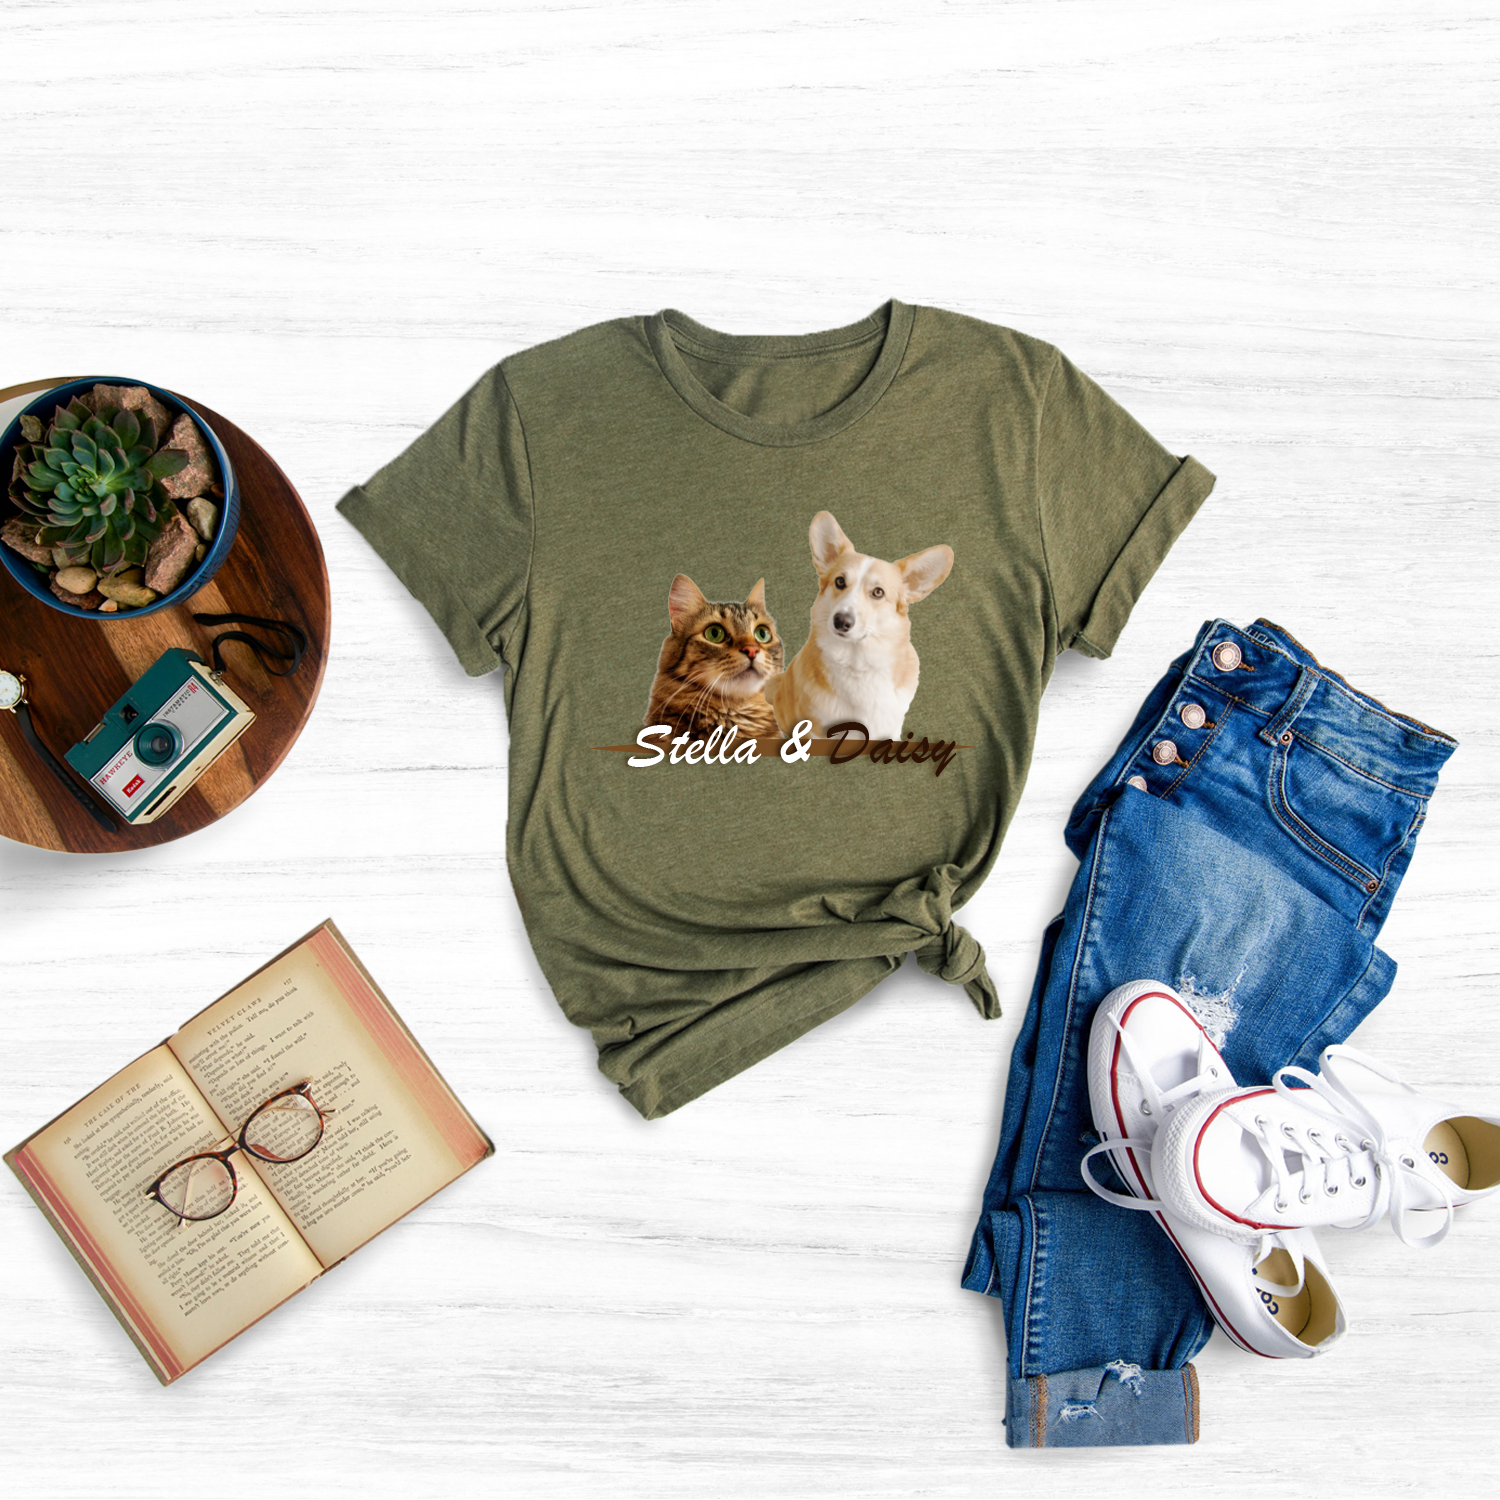 Create a unique dog shirt featuring your dog's name, photo, or special message.